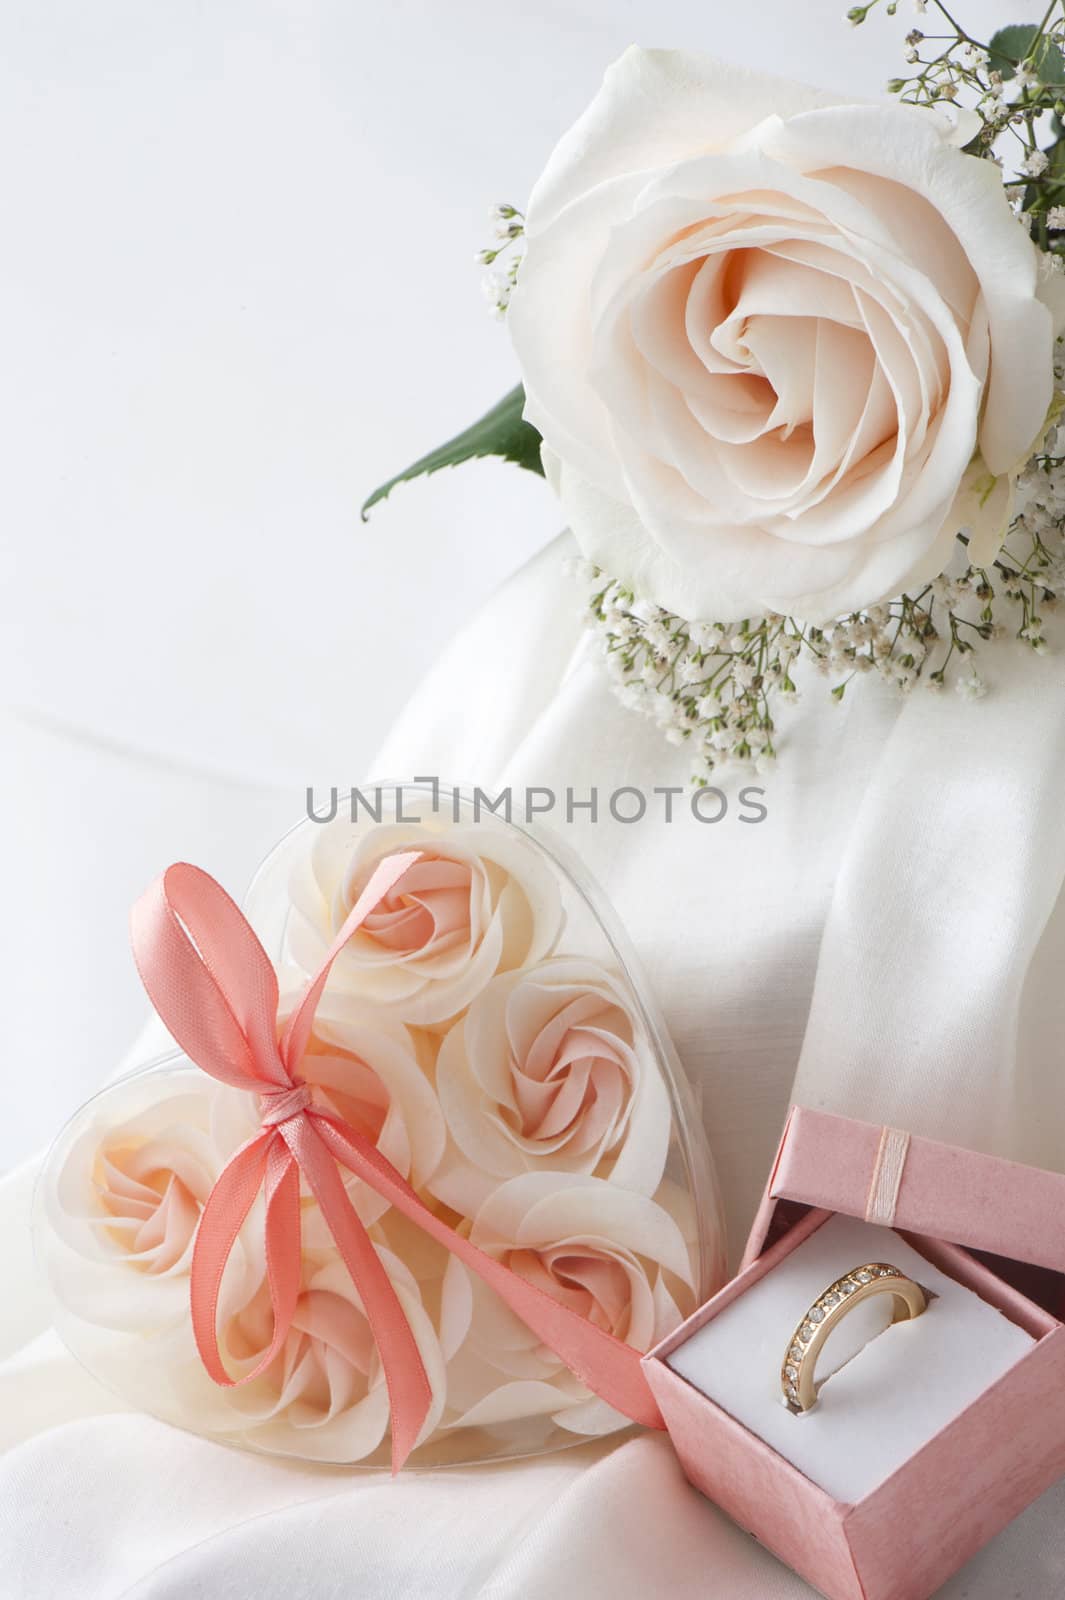 Wedding favors,wedding rings and flowers on white background